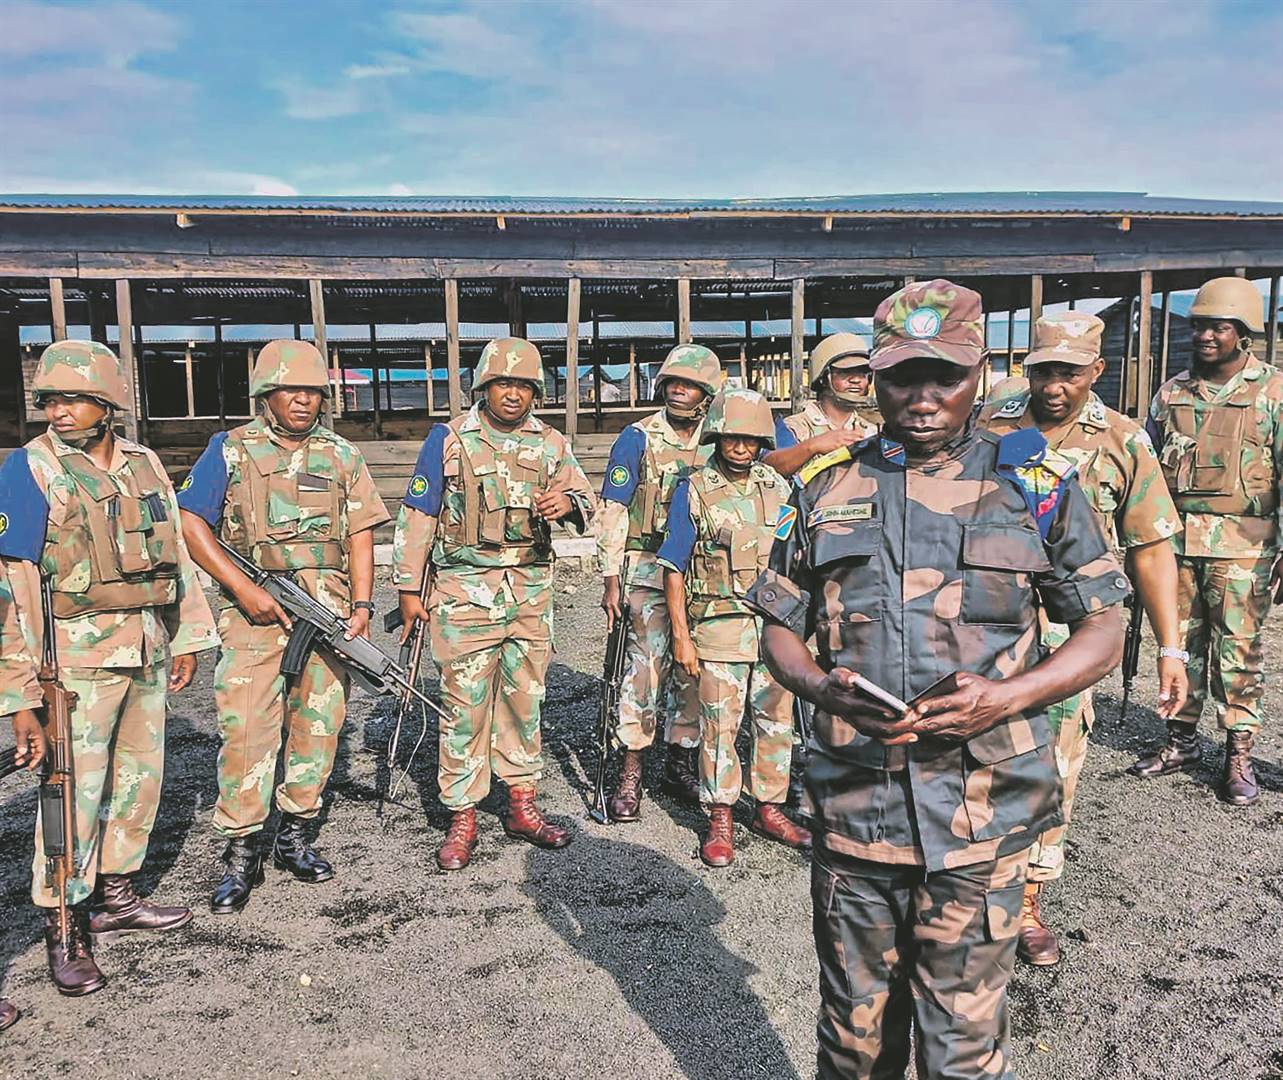 The SANDF contingent based in the DRC has no logistical support and the entire operation appears to be a mess.